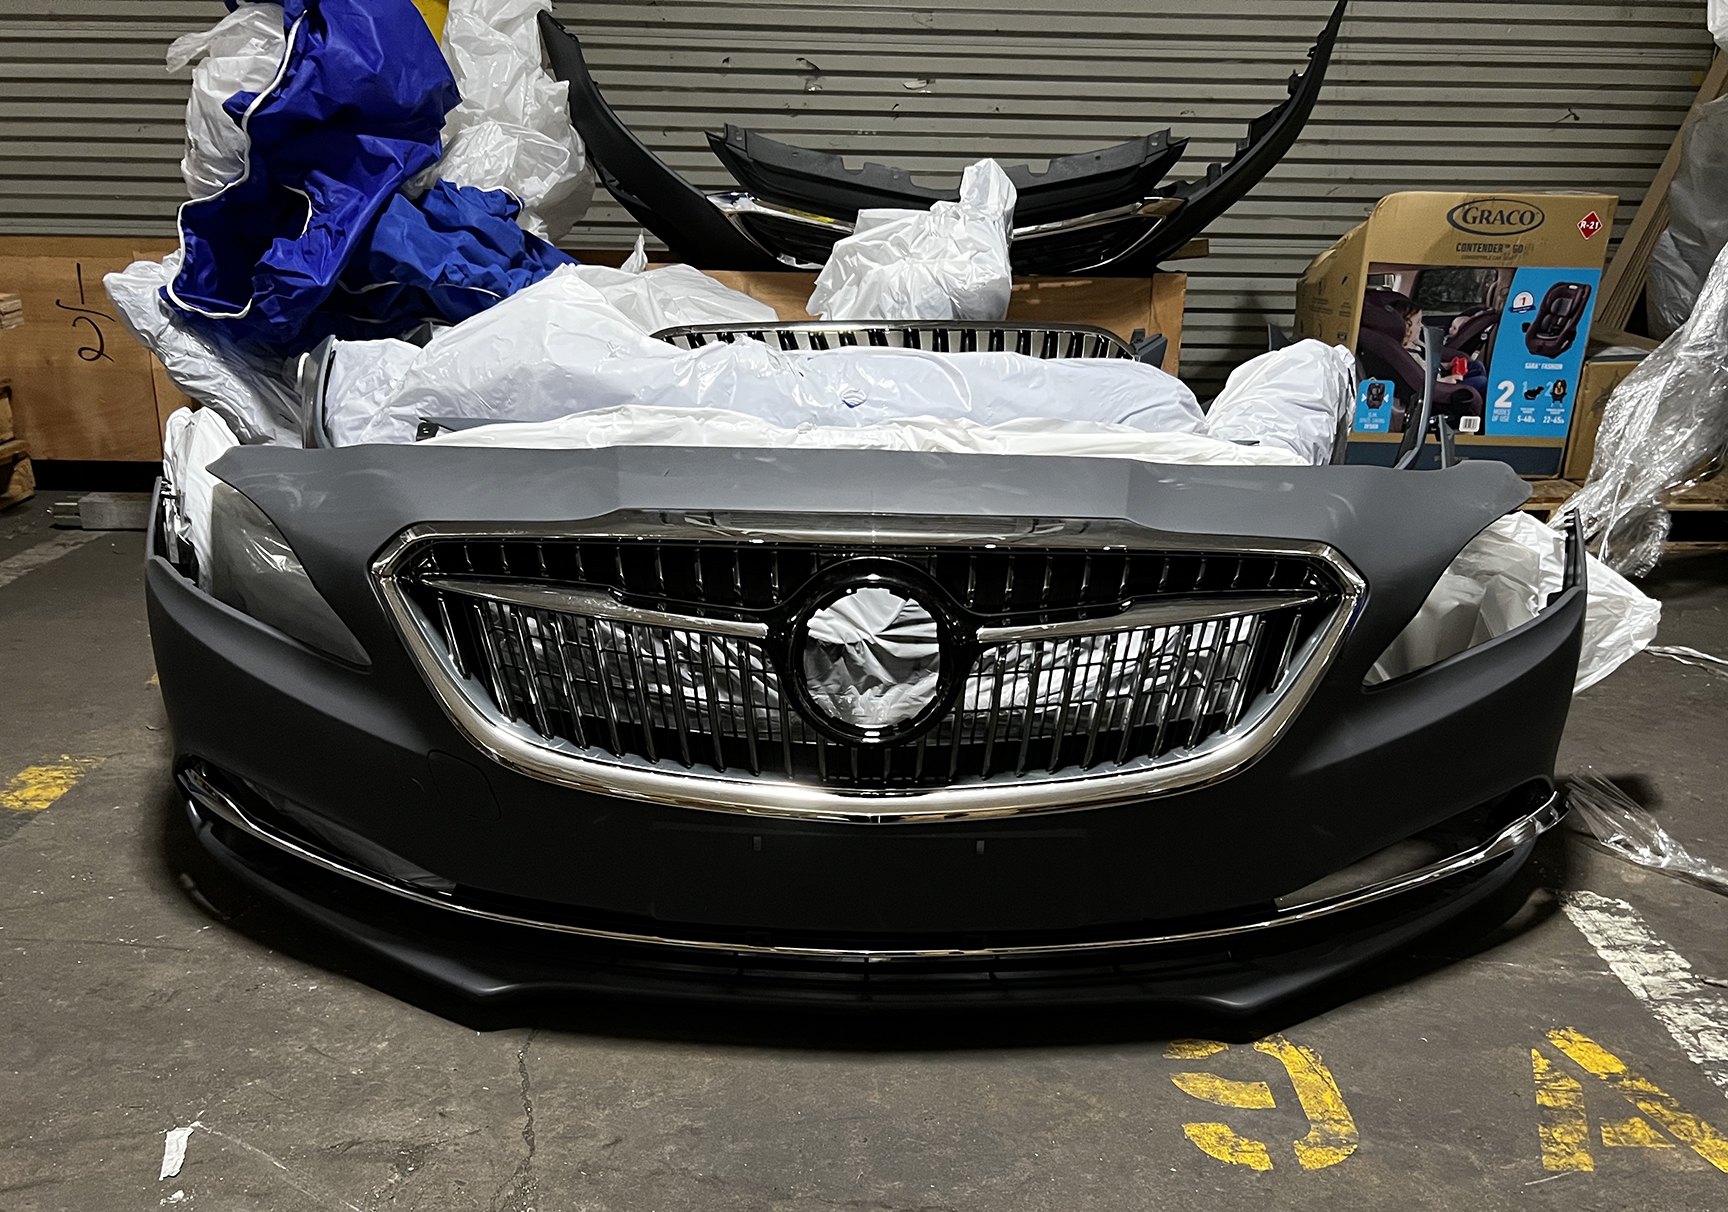 Border patrol confiscates nearly $200,000 in fake auto parts from China